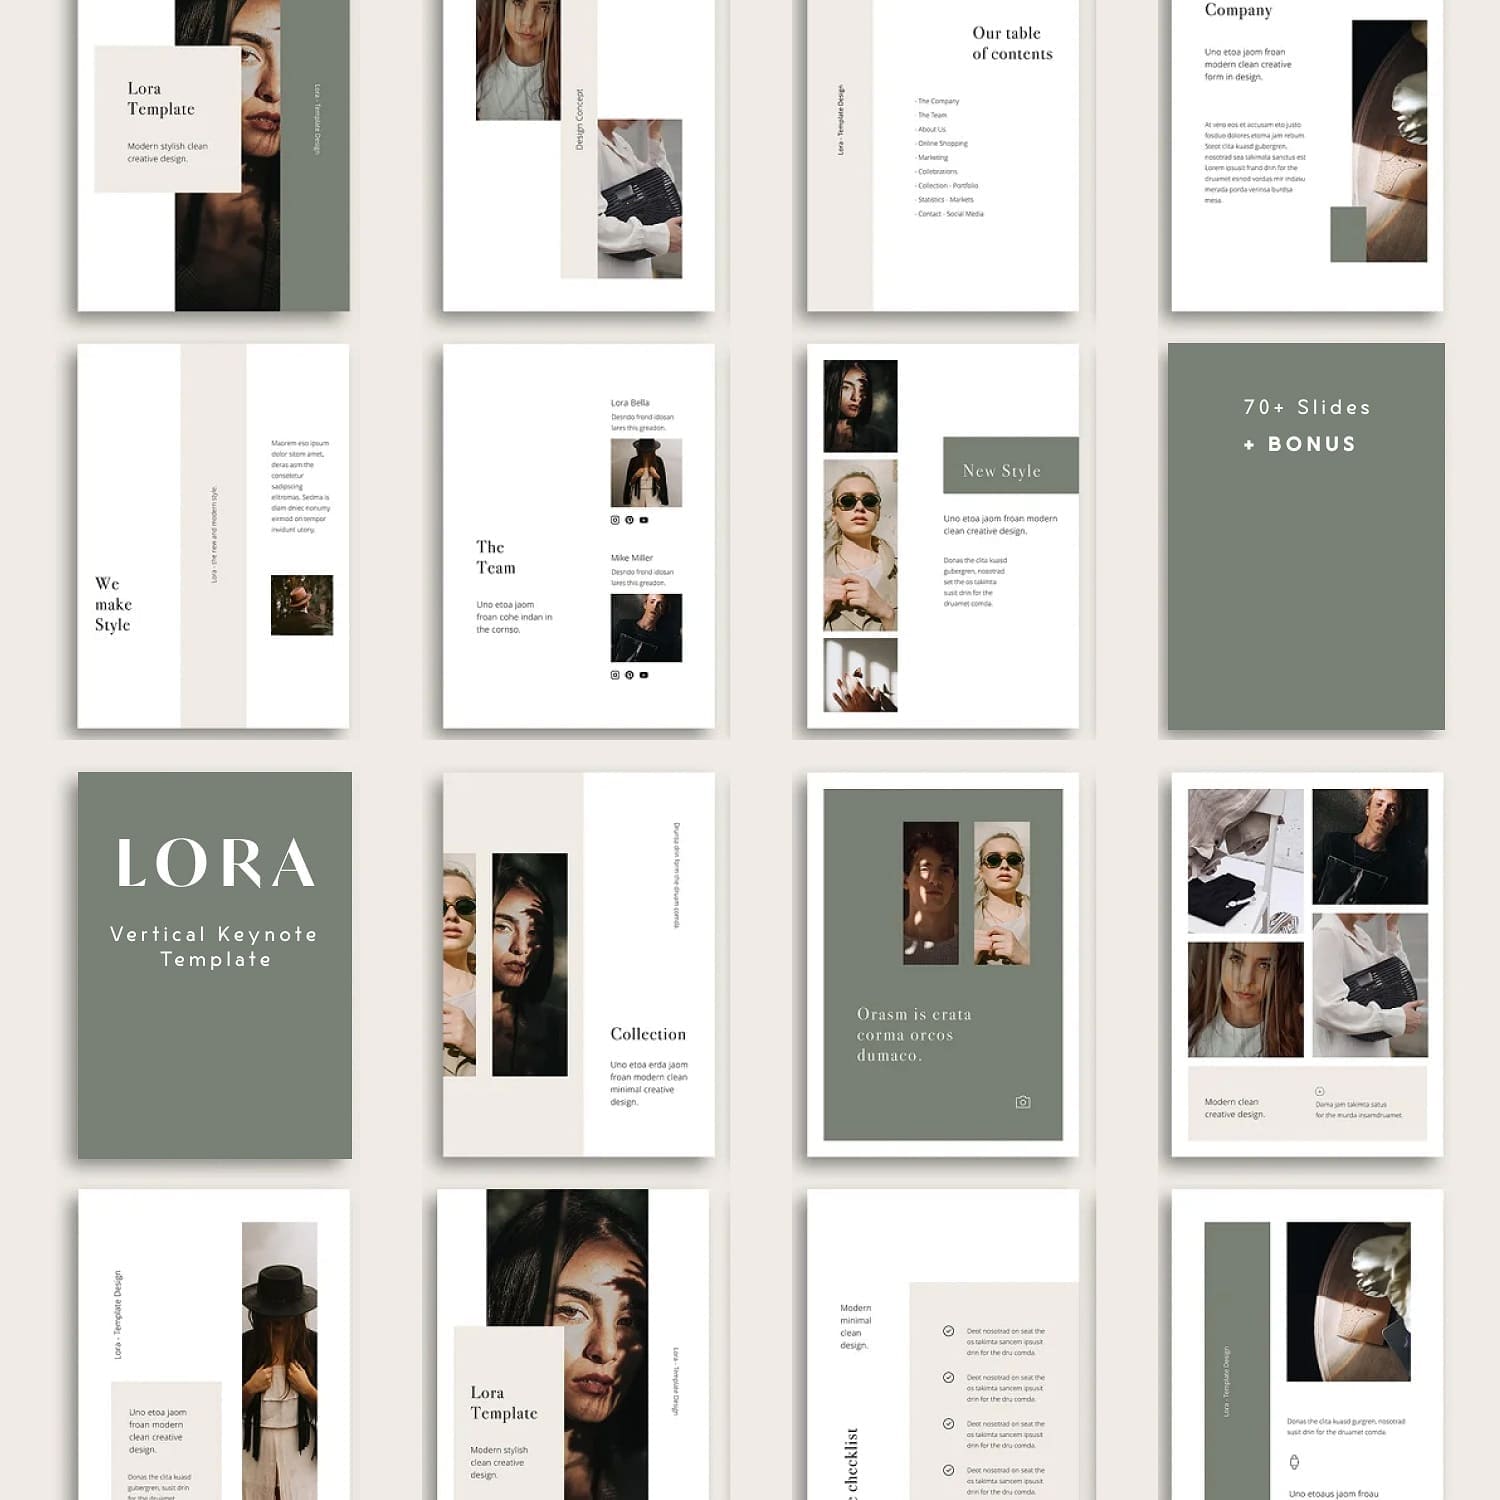 Lora Template, Our table of contents, Company.